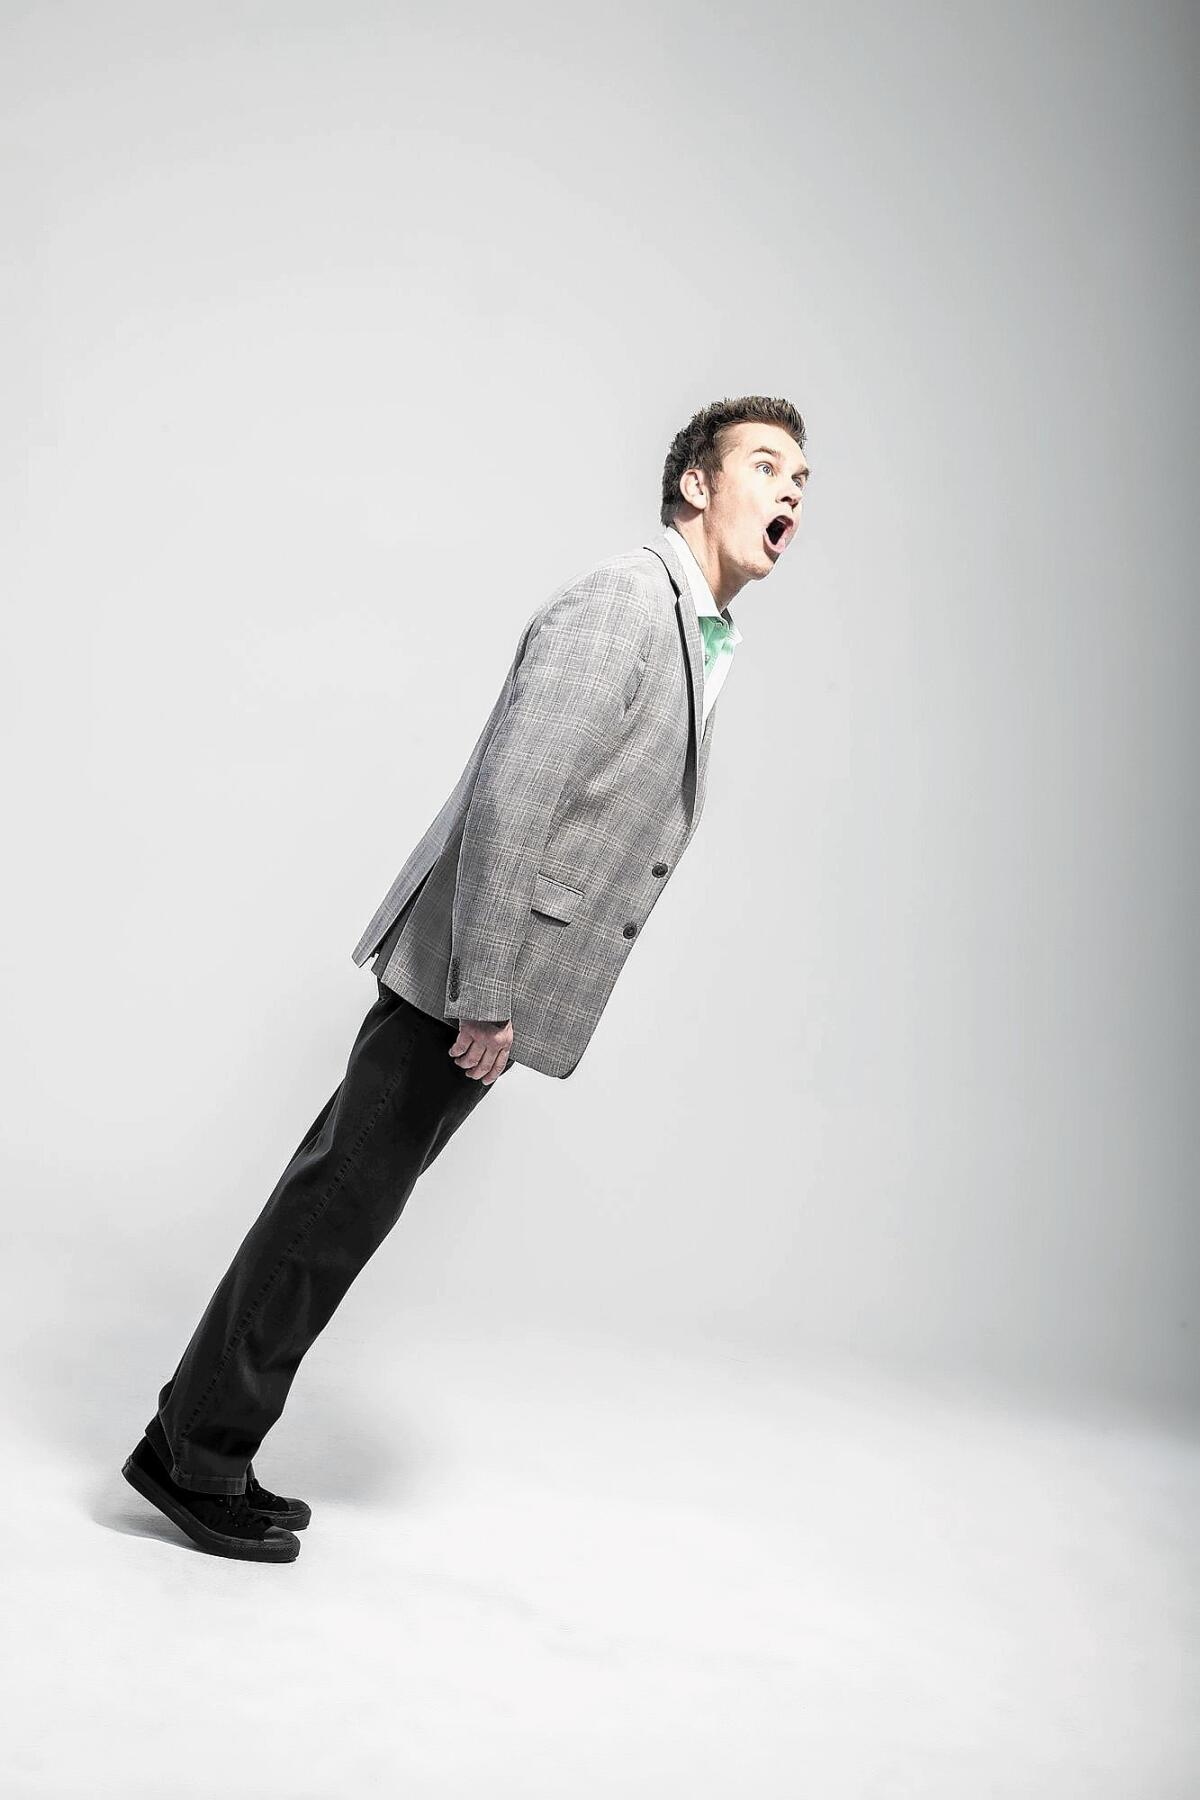 Brian Regan performs Saturday at the Segerstrom Center for the Arts.